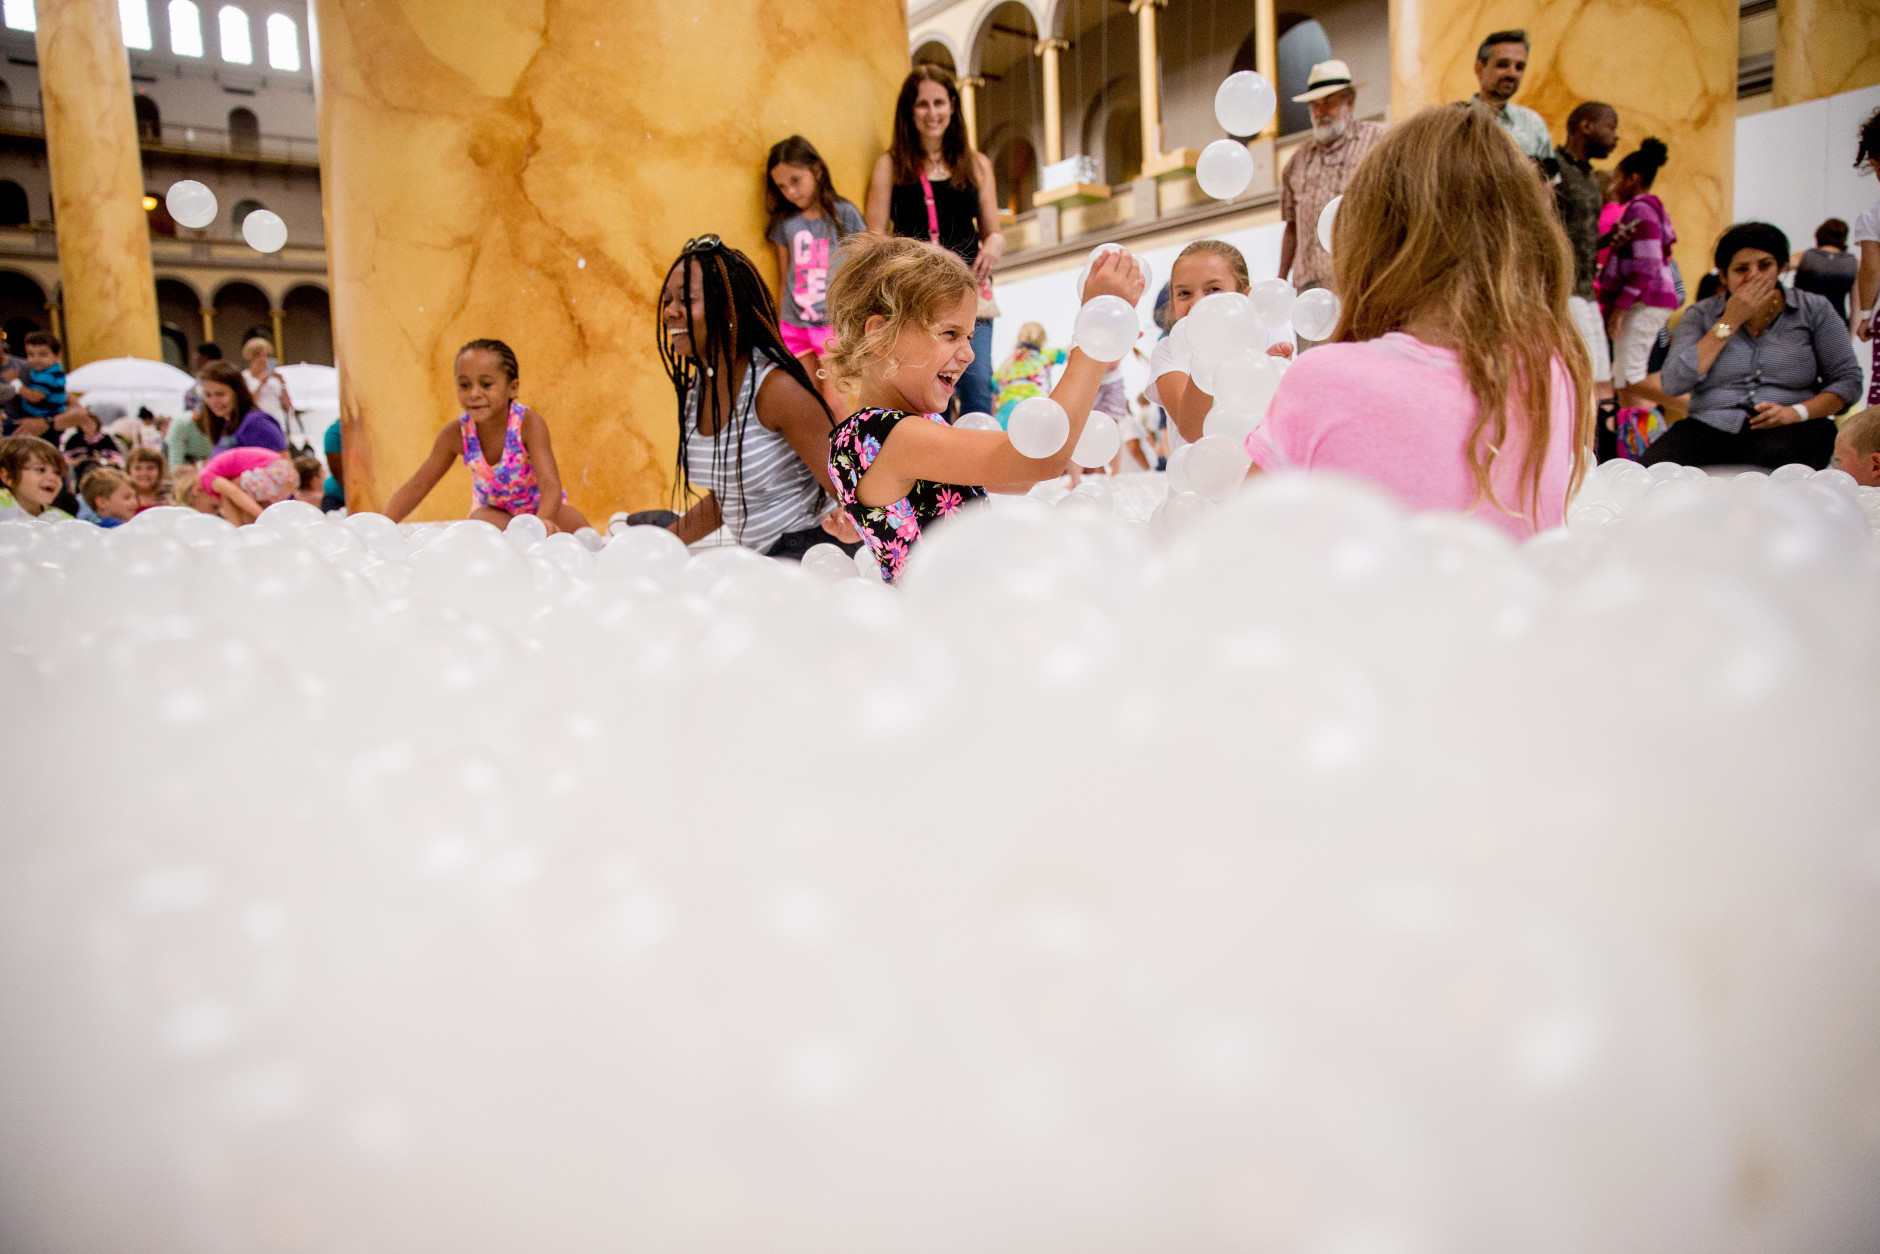 Children play at "The Beach", an interactive architectural installation inside the National Building Museum in Washington, Friday, July 17, 2015. The Beach, which spans the length of the museum's Great Hall, was created in partnership with Snarkitecture, and covers 10,000 square feet and includes an ocean of nearly one million recyclable translucent plastic balls. (AP Photo/Andrew Harnik)